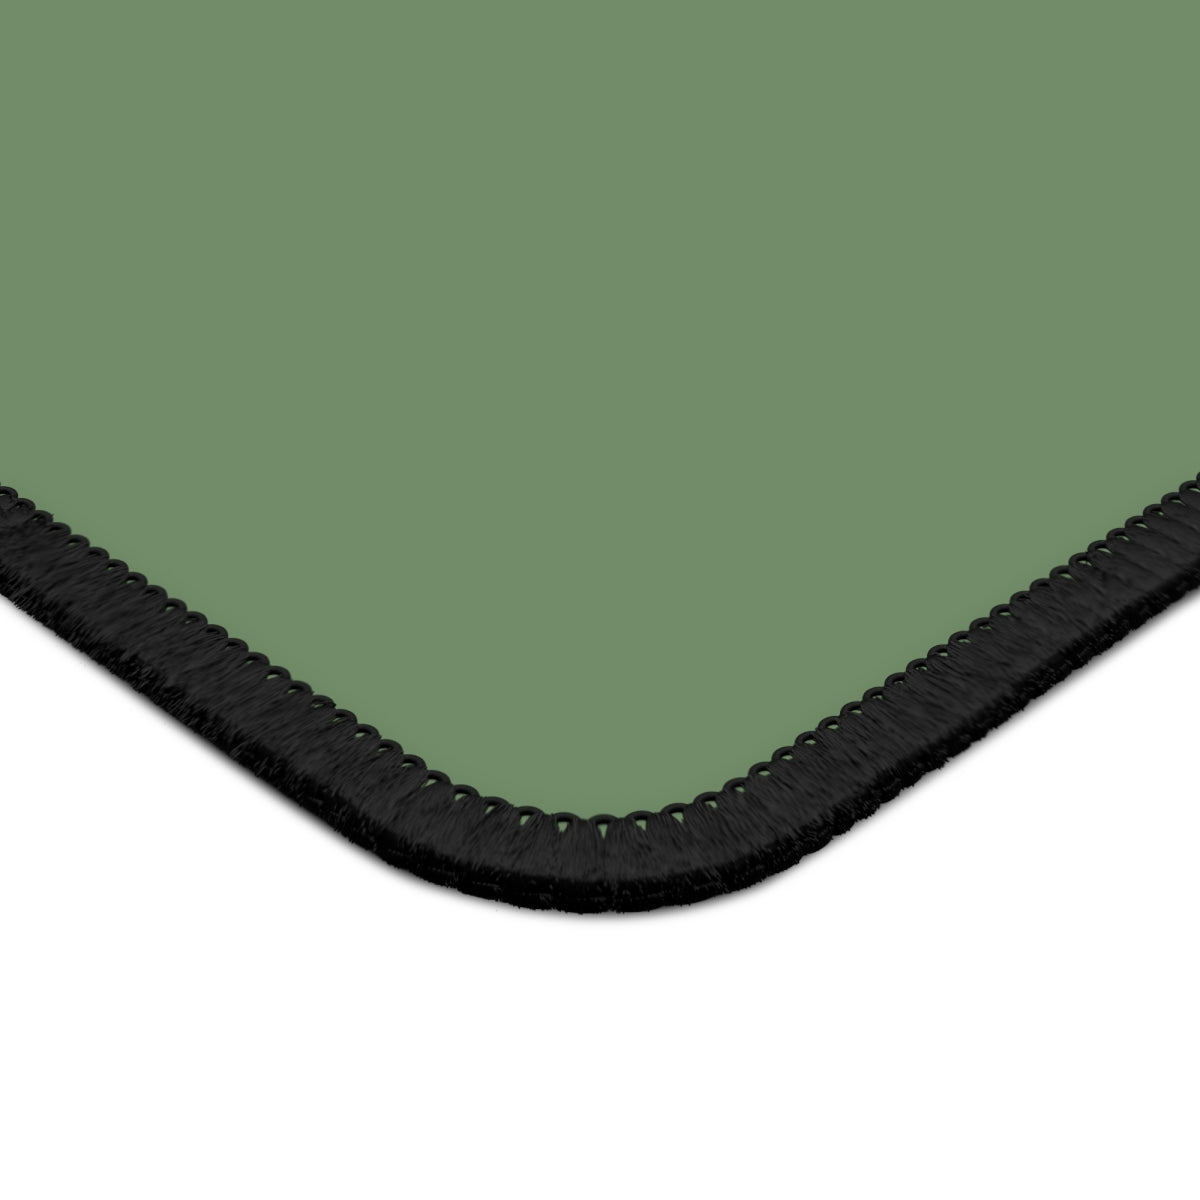 Sage Green Gaming Mouse Pad - Desk Cookies